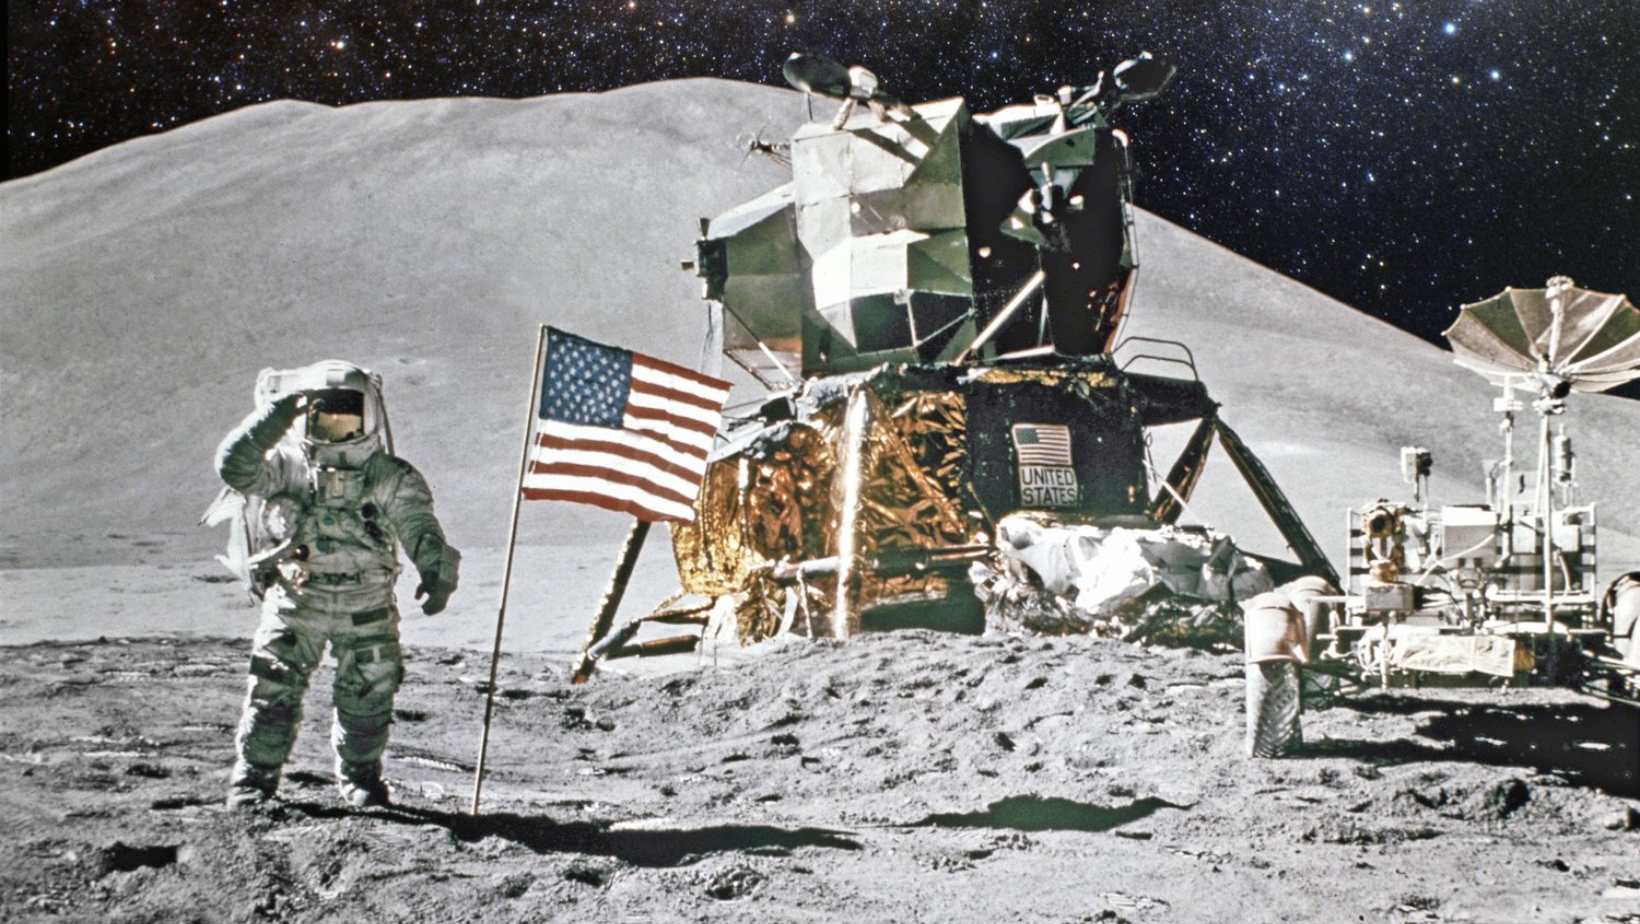 astronaut with US flag sends on the surface of the moon